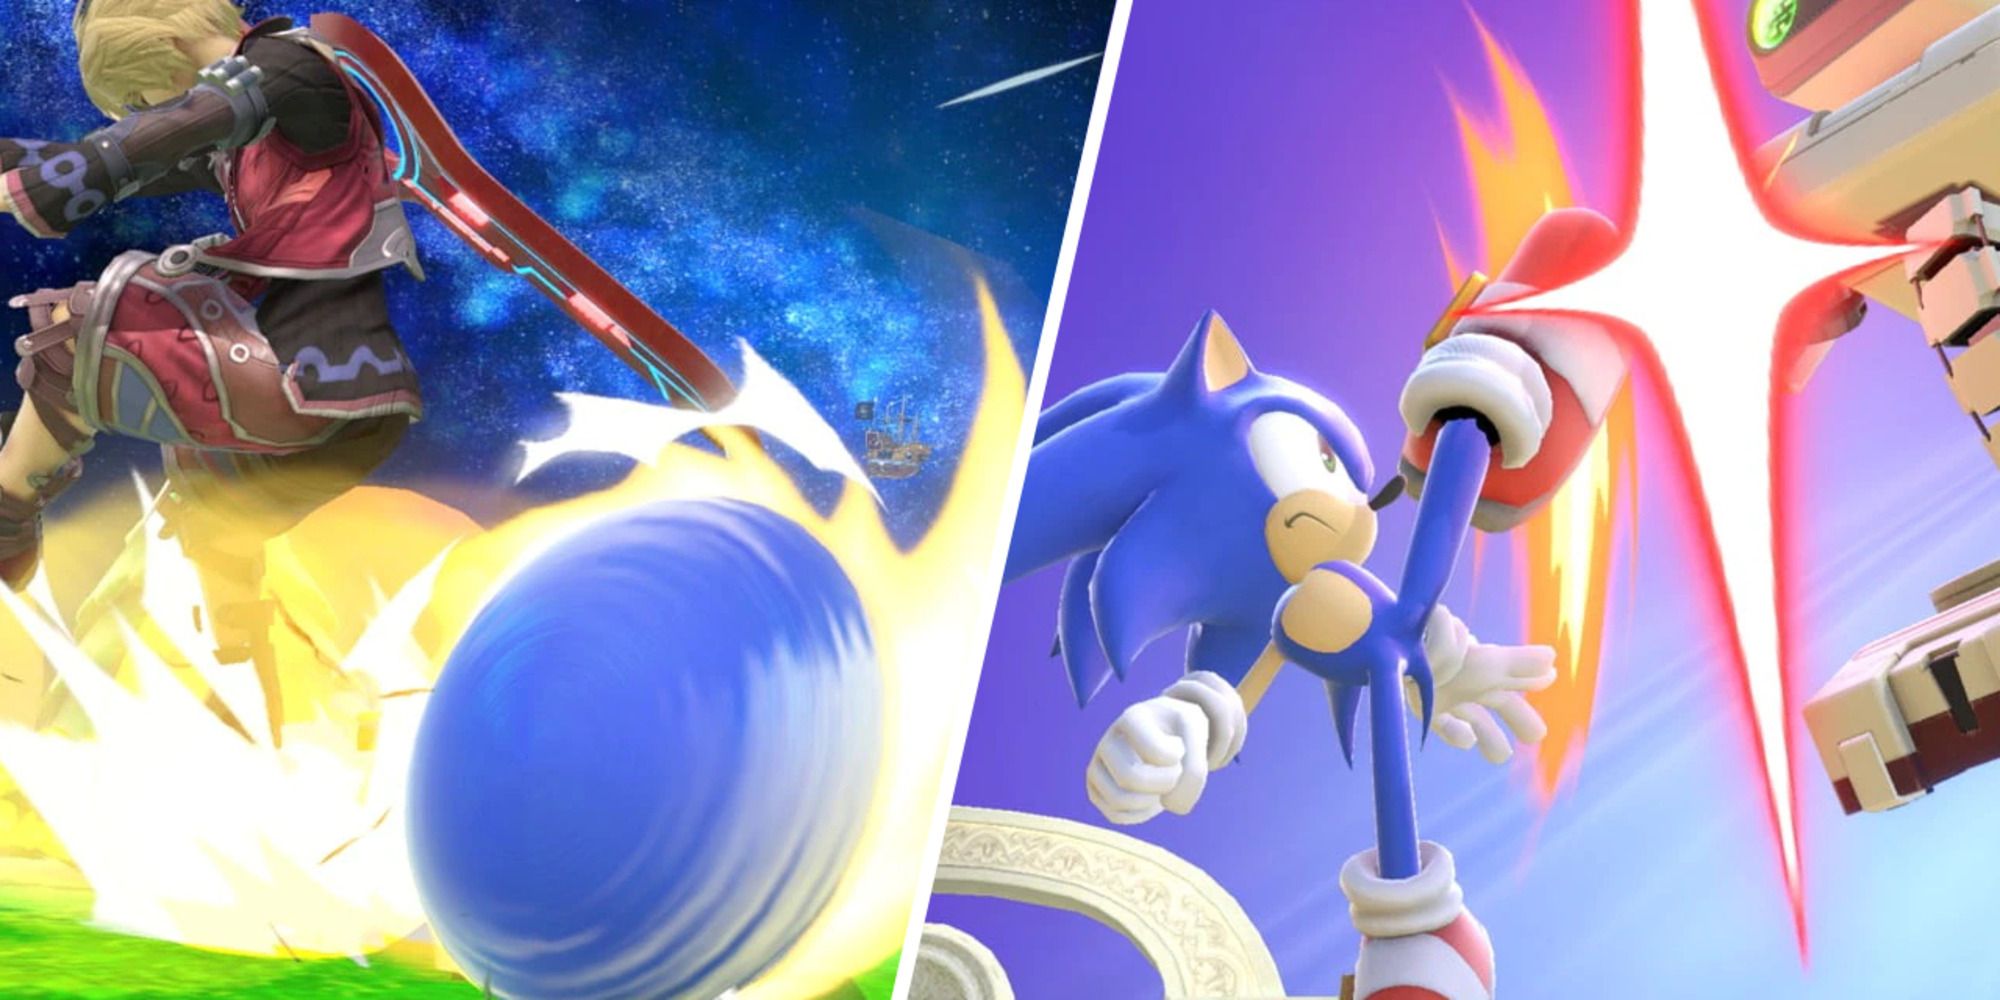 Sonic using his Spin Dash on Shulk and Up-Tilt on R.O.B. in Super Smash Bros. Ultimate.